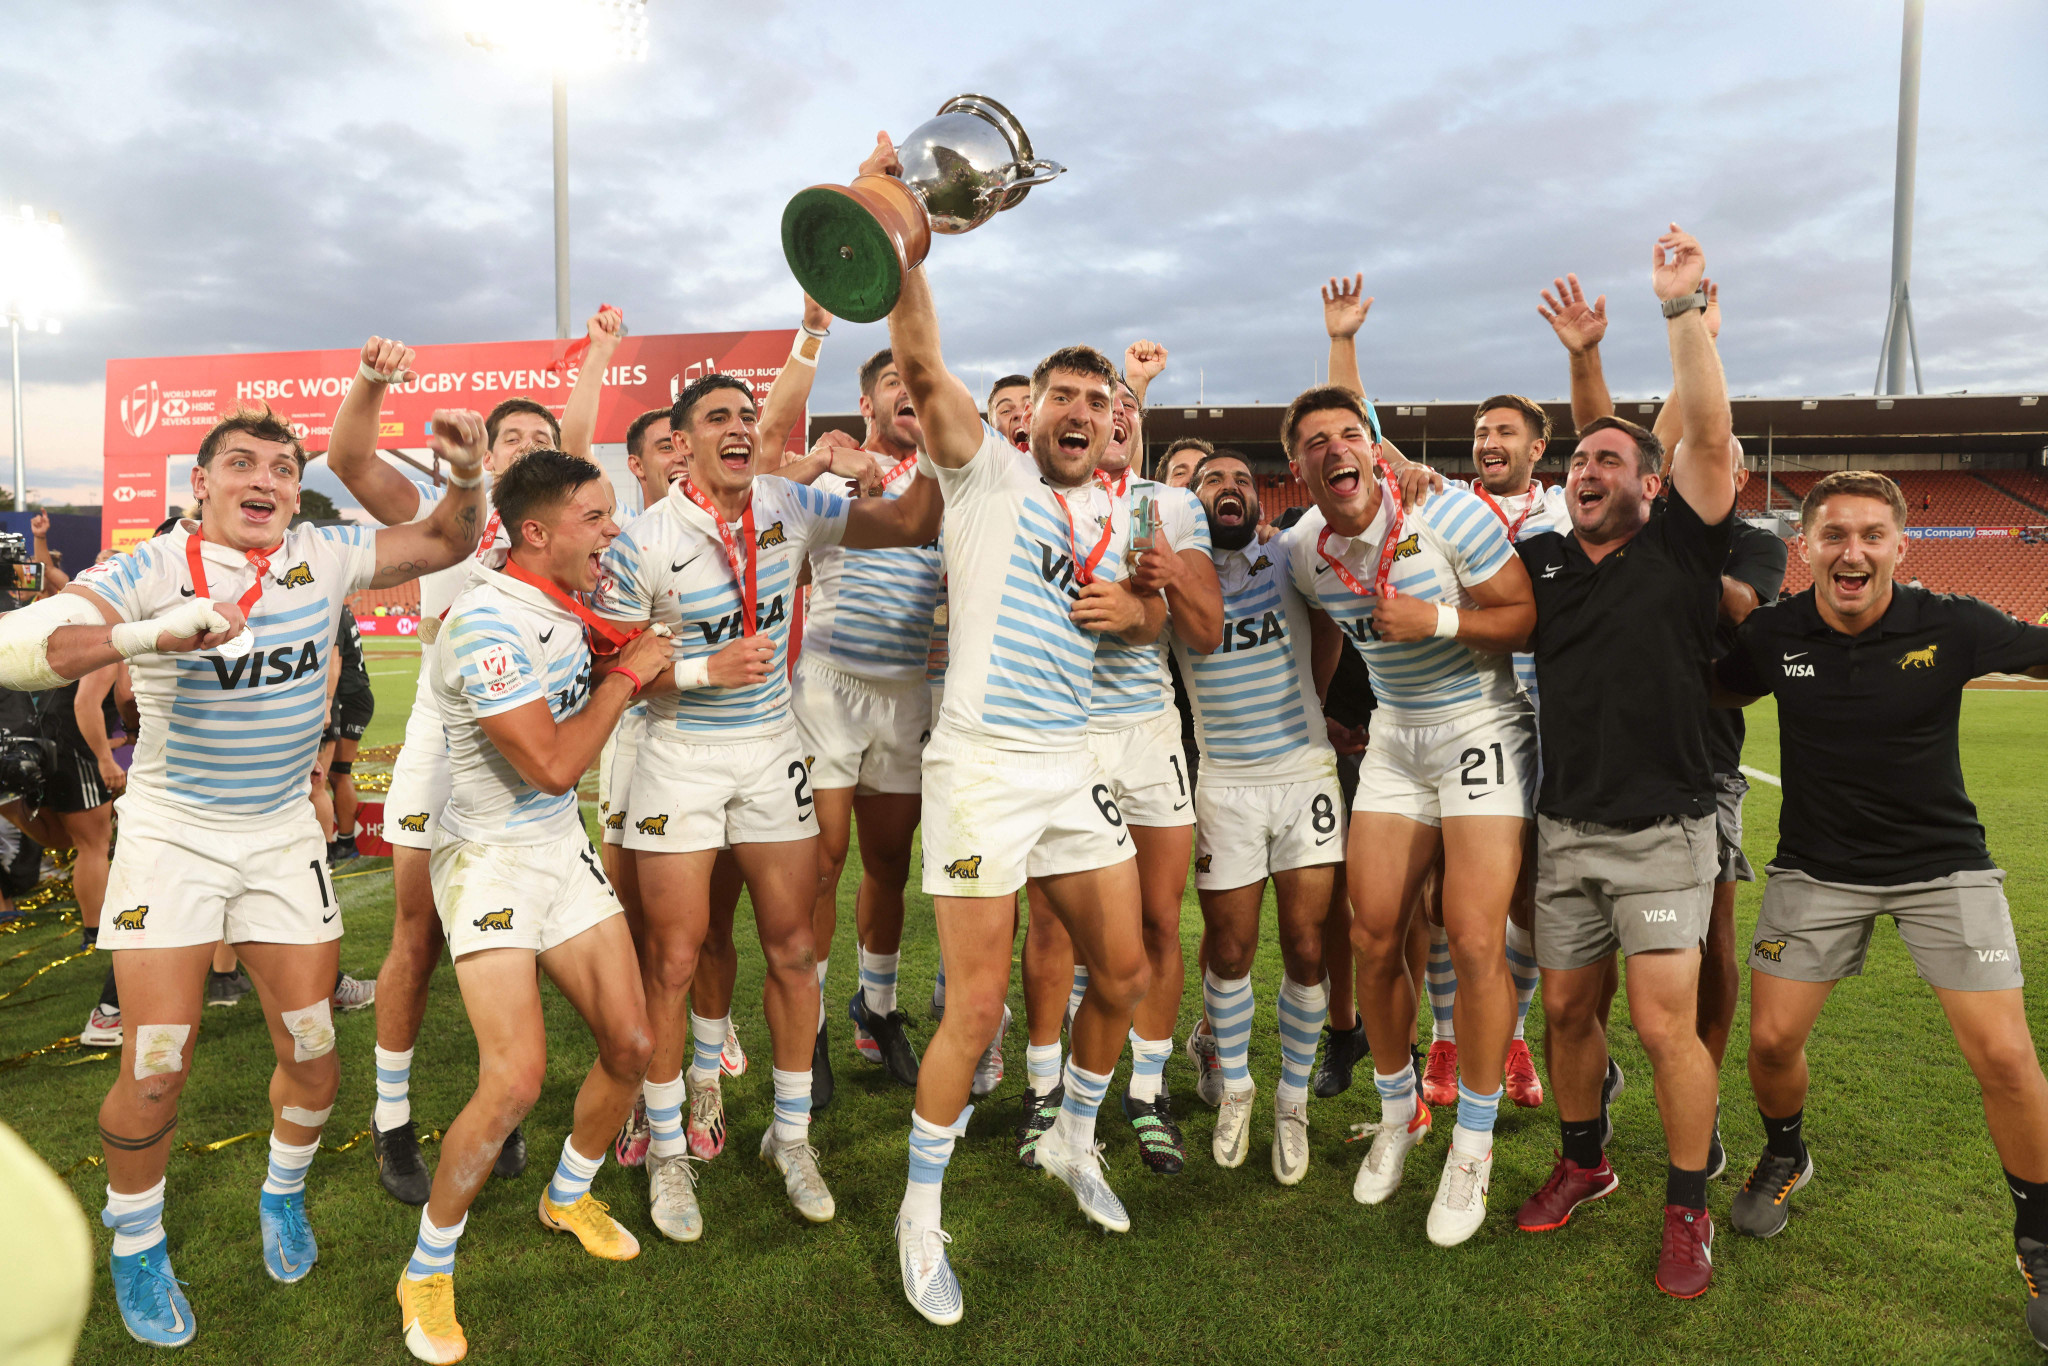 Argentina overturned a 12-point deficit to beat New Zealand and win the men's World Rugby Sevens Series trophy in Hamilton ©Getty Images 